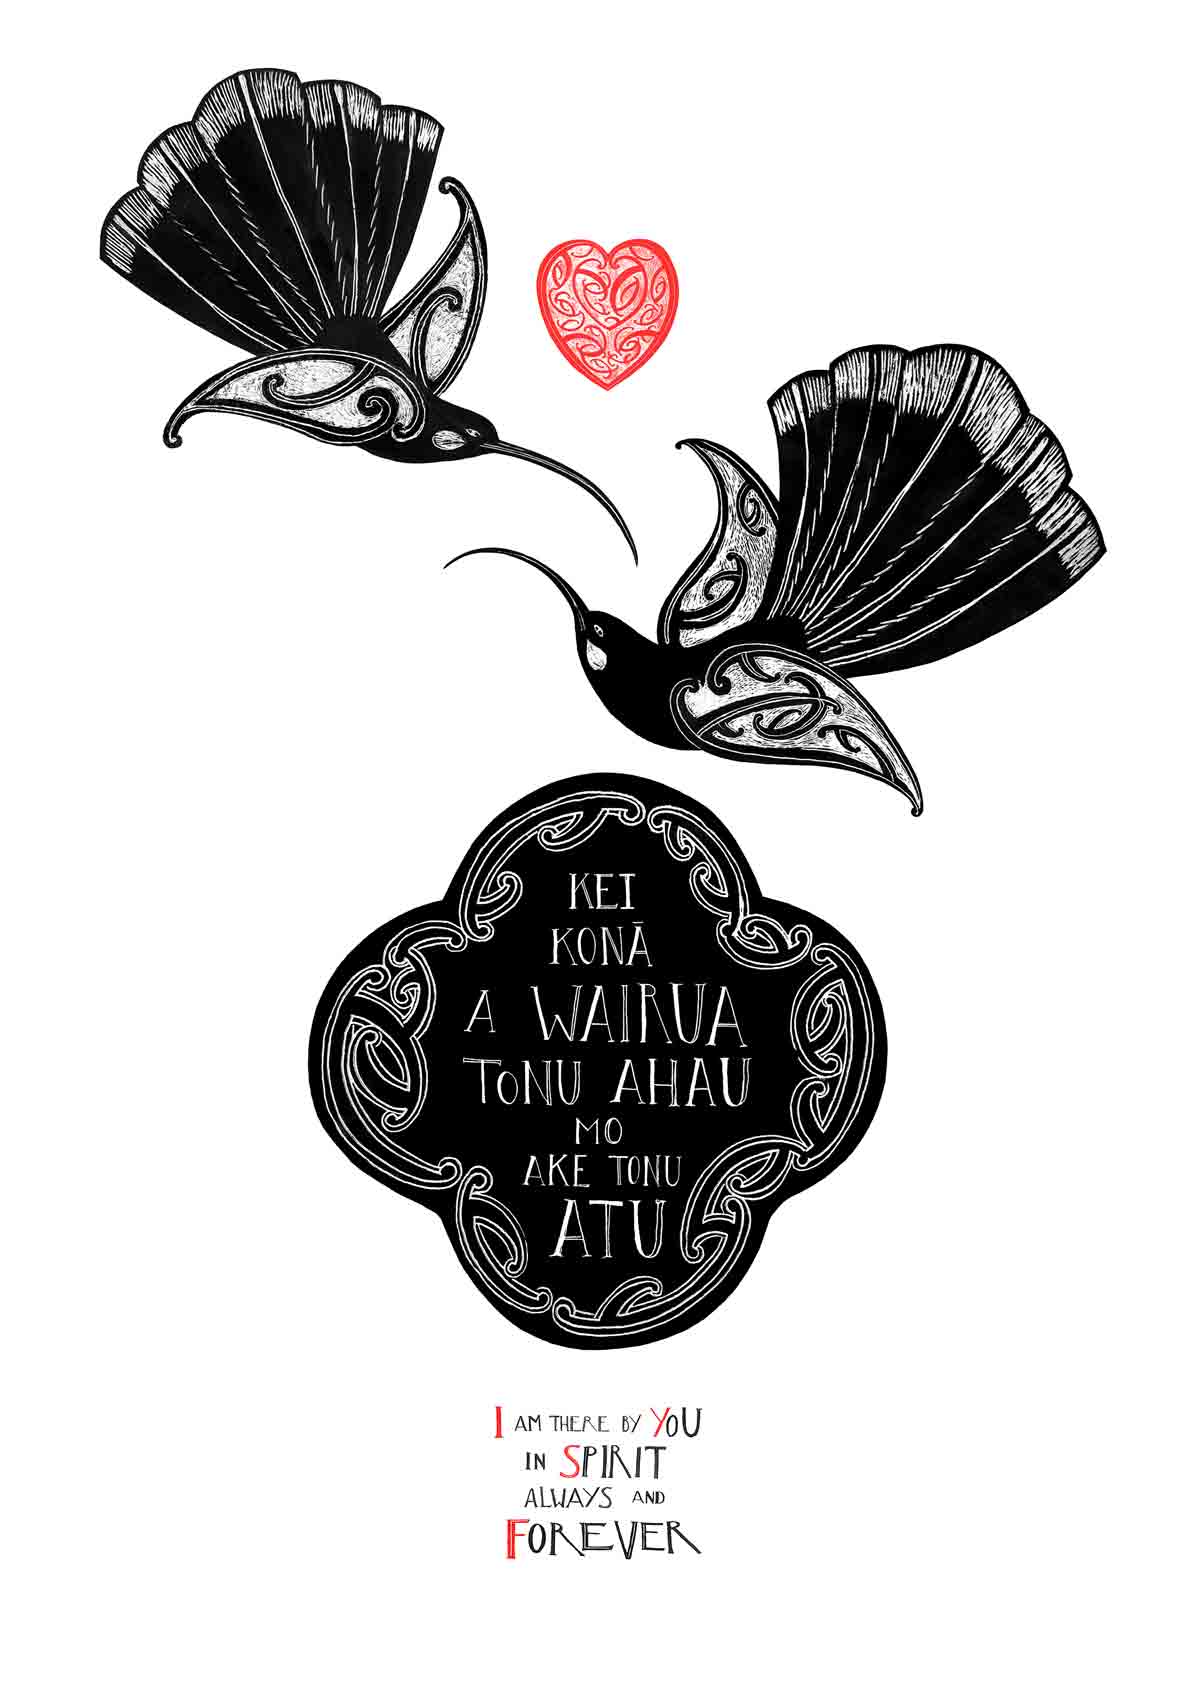 Huia Wairua limited edition art print by nz artist Amber Smith. I am there by you in spirit - always and forever written in te reo Maori and English translation. Maori art design Huia birds and aroha love heart.